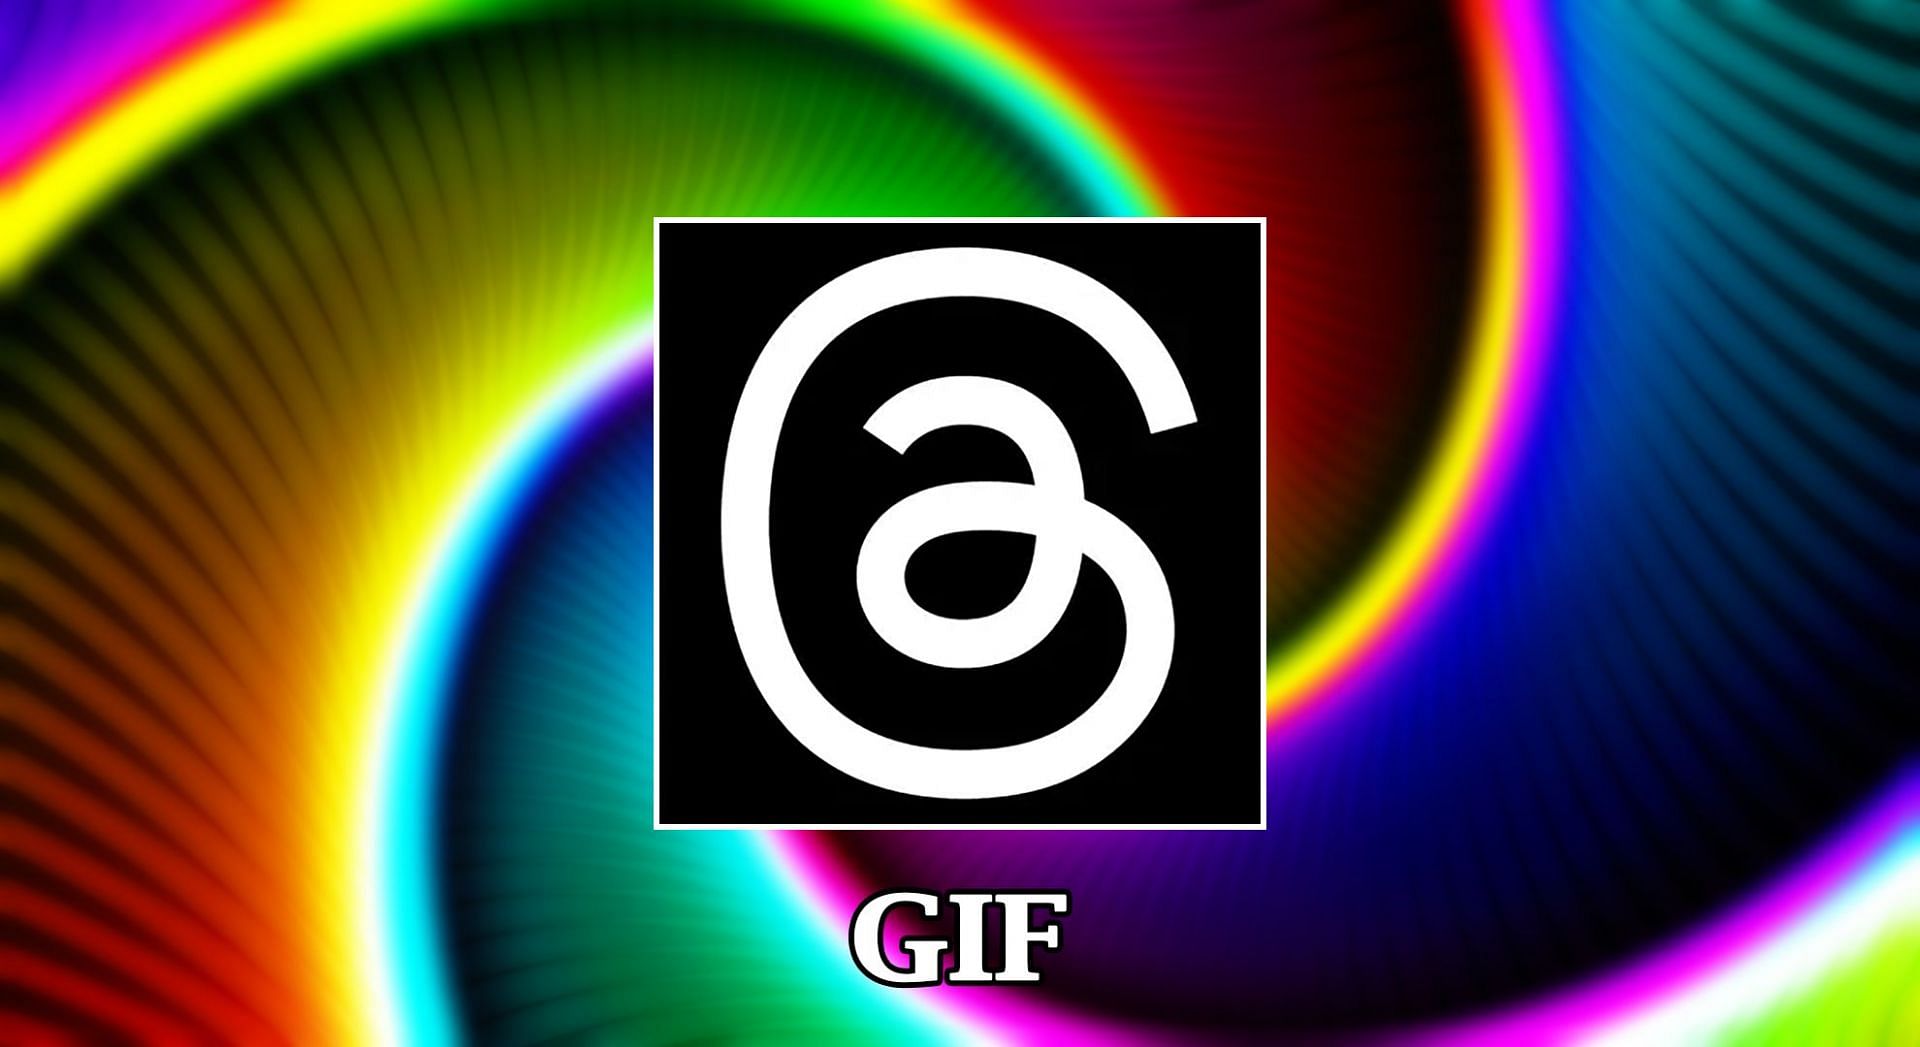 GIPHY: The GIF Search Engine on the App Store